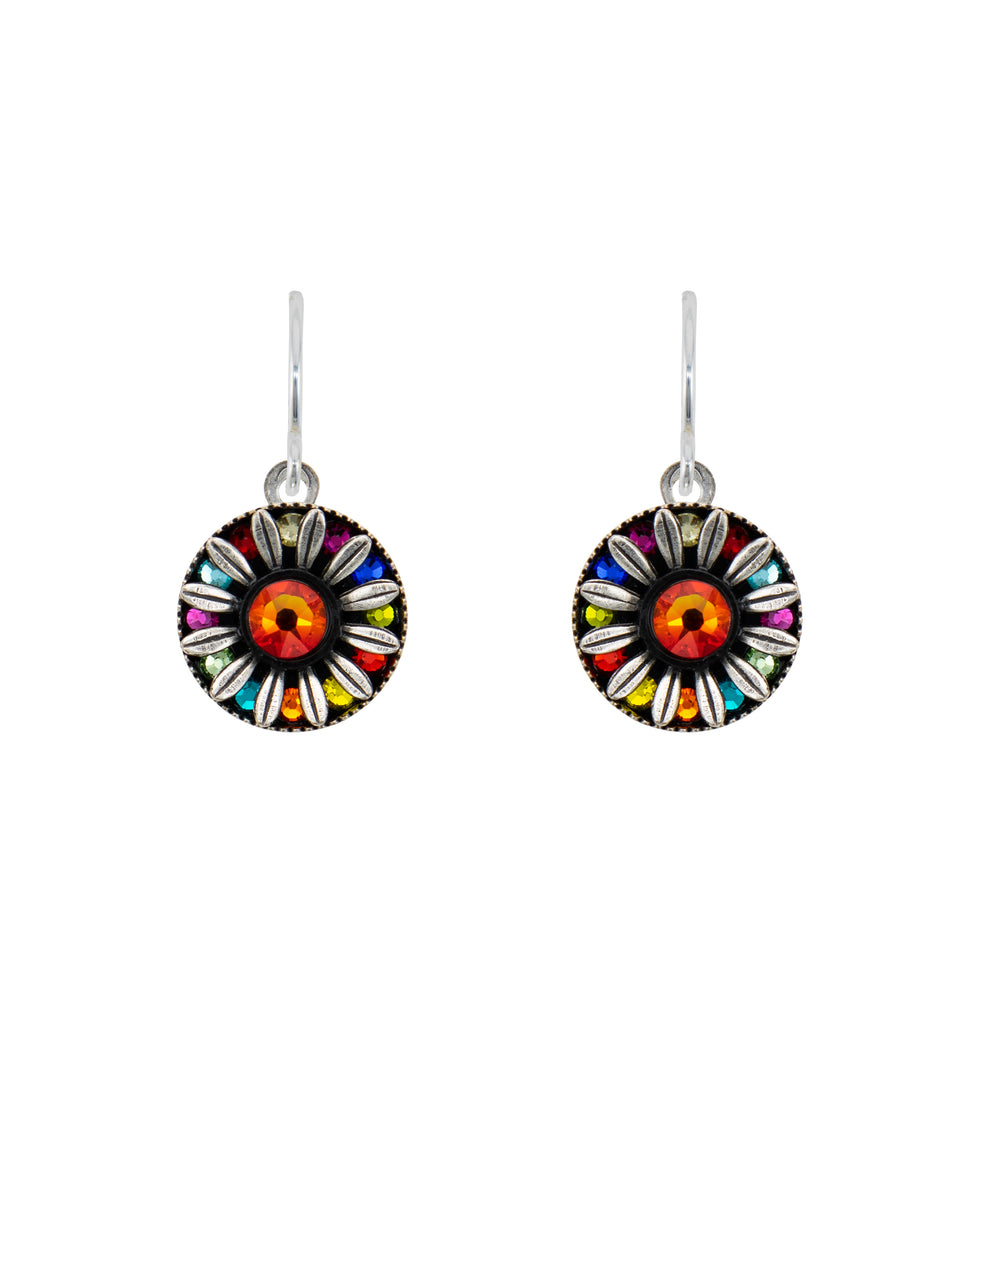 Firefly Mosaics: Daisy Earrings from The Botanical Collection